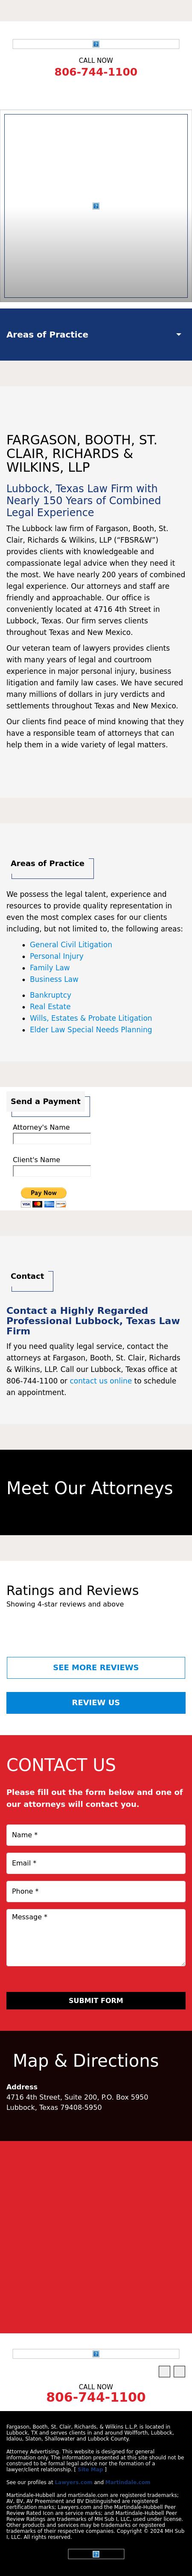 Fargason Booth St Clair Richards - Lubbock TX Lawyers